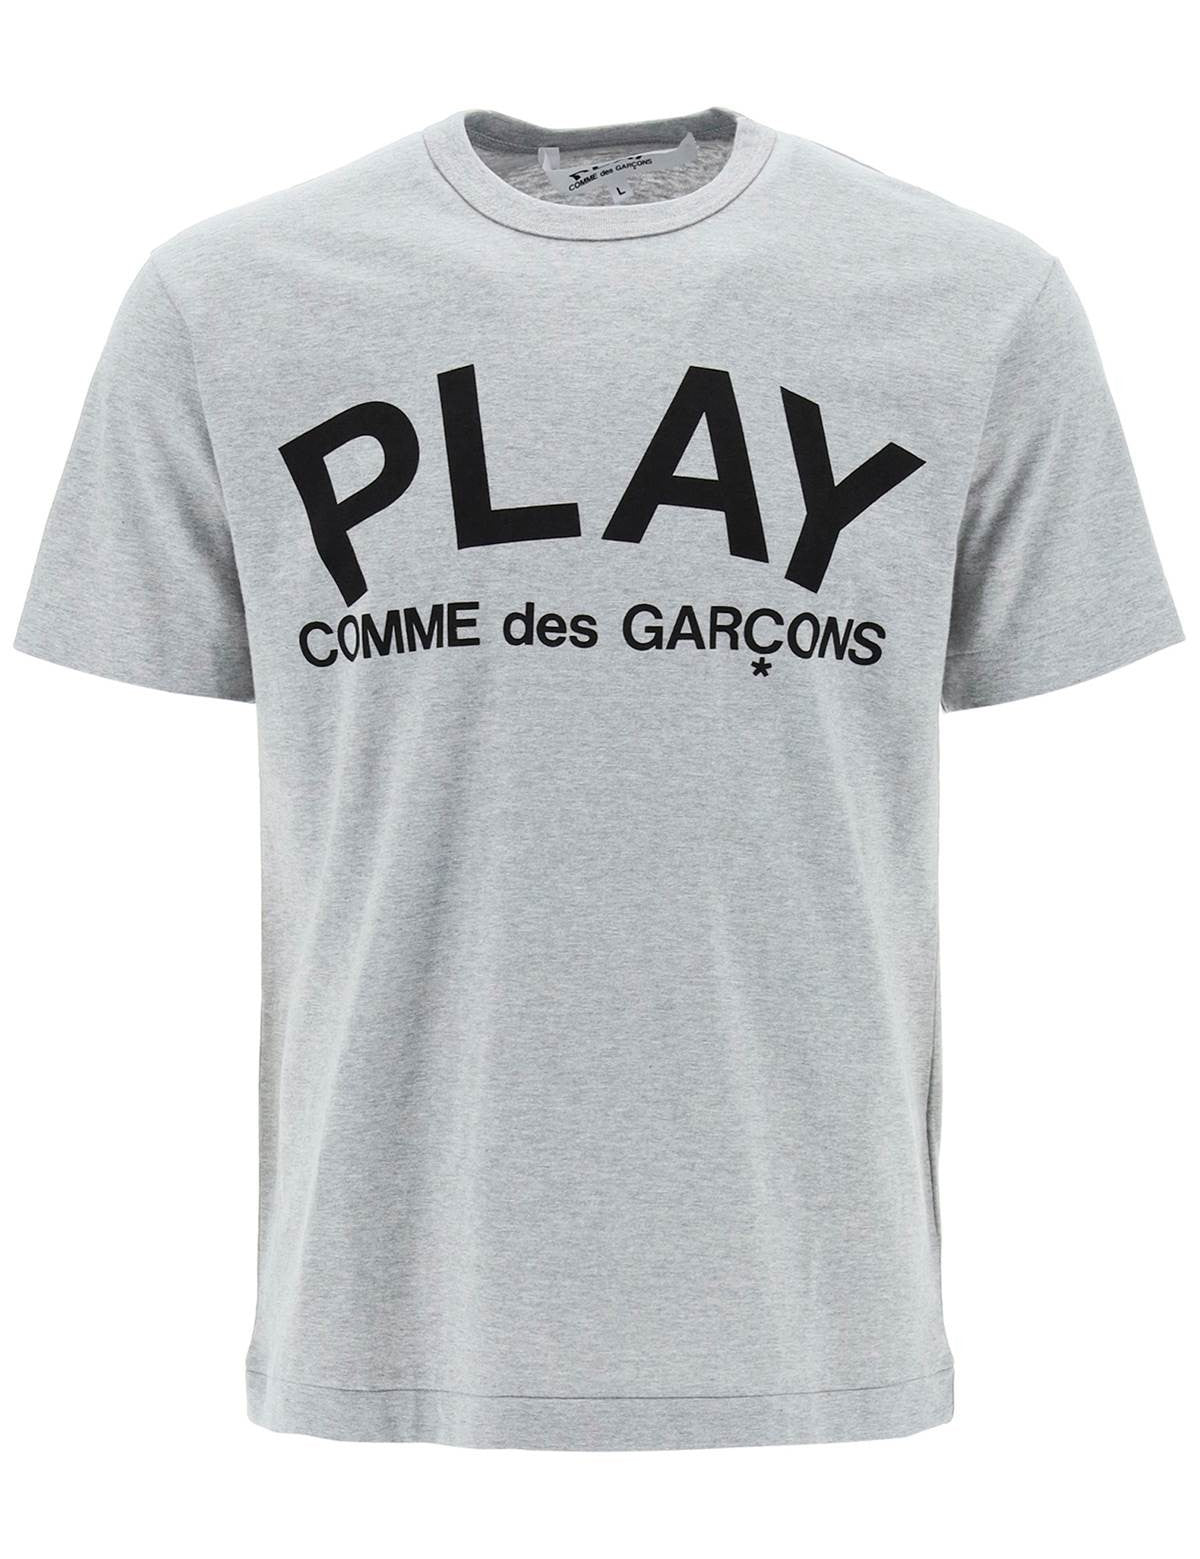 comme-des-garcons-play-t-shirt-with-play-print.jpg